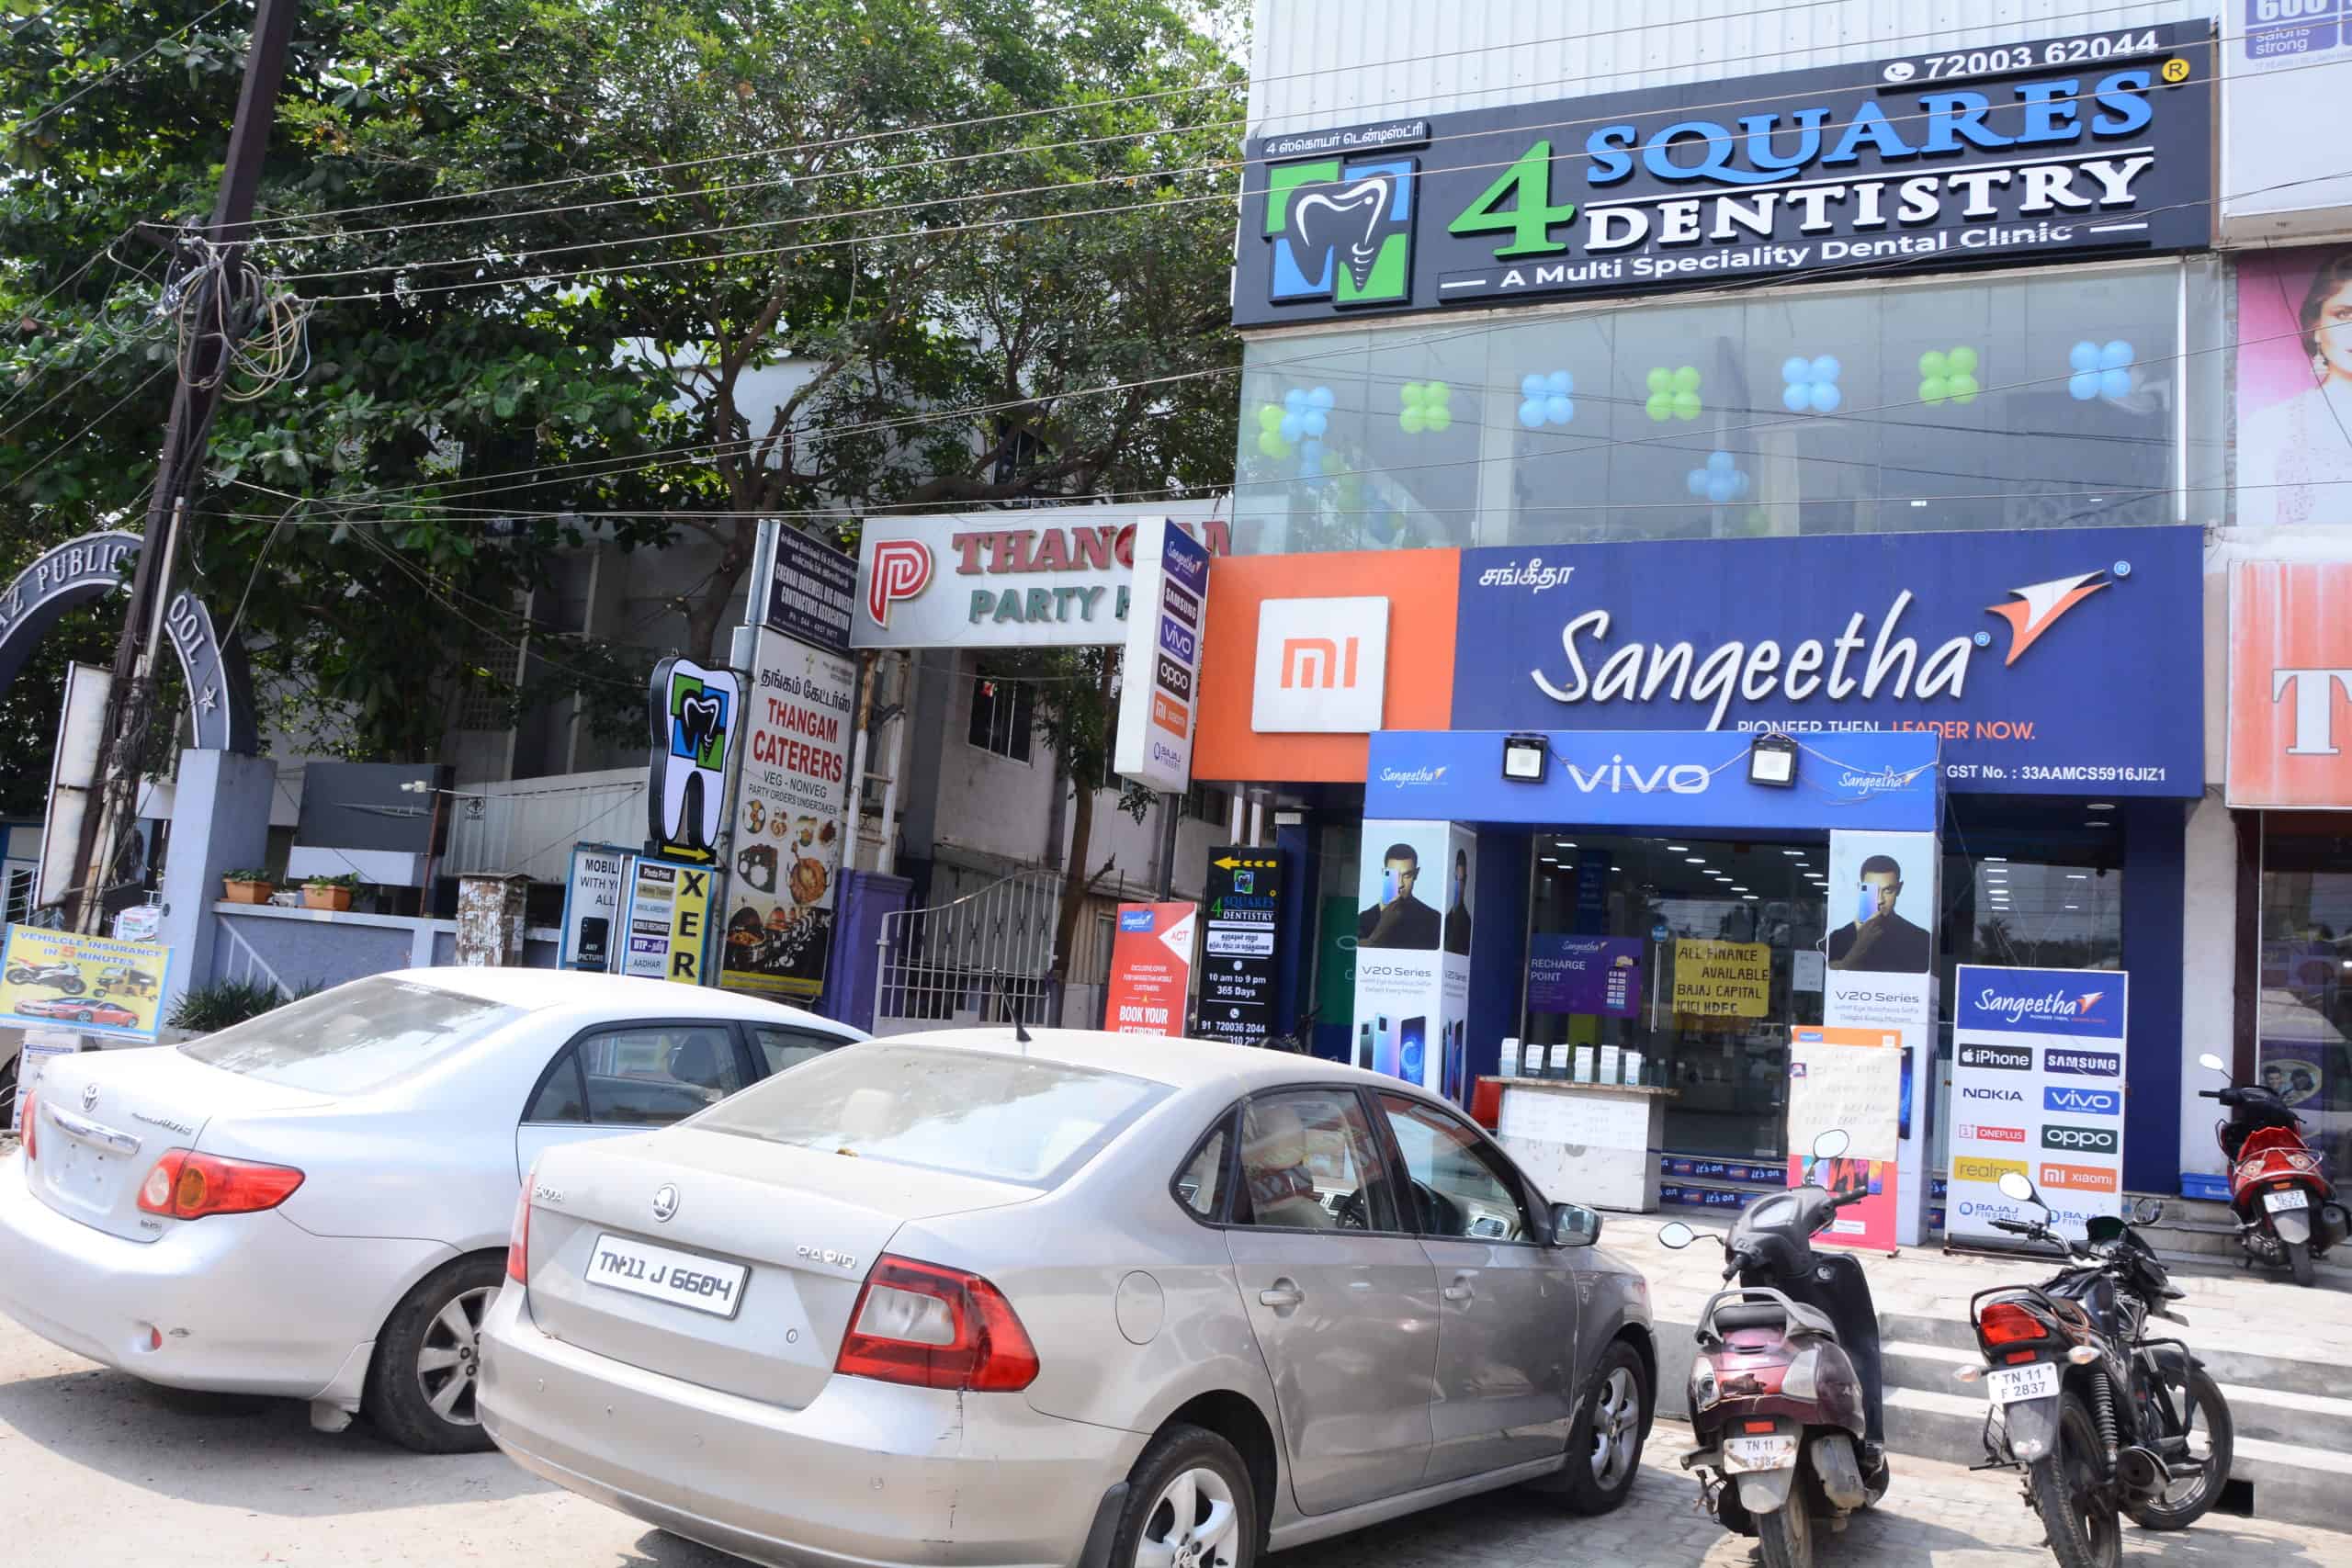 Front View of the 4 Squares Dentirstry - Best Dental Clinic in Gowrivakkam